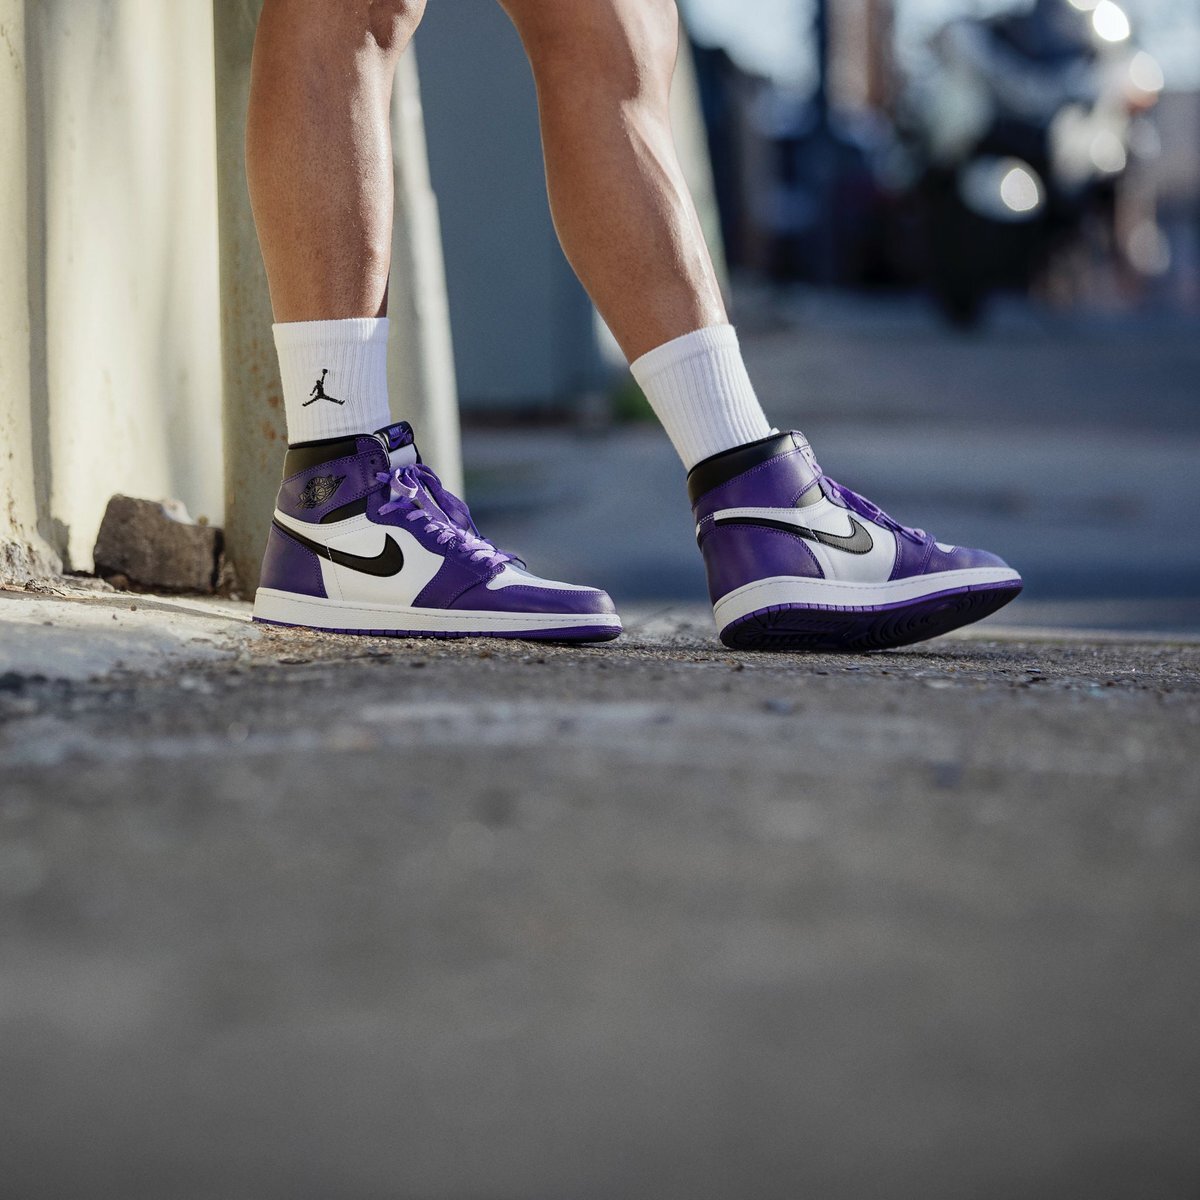 how to wear air jordan 1 low with shorts